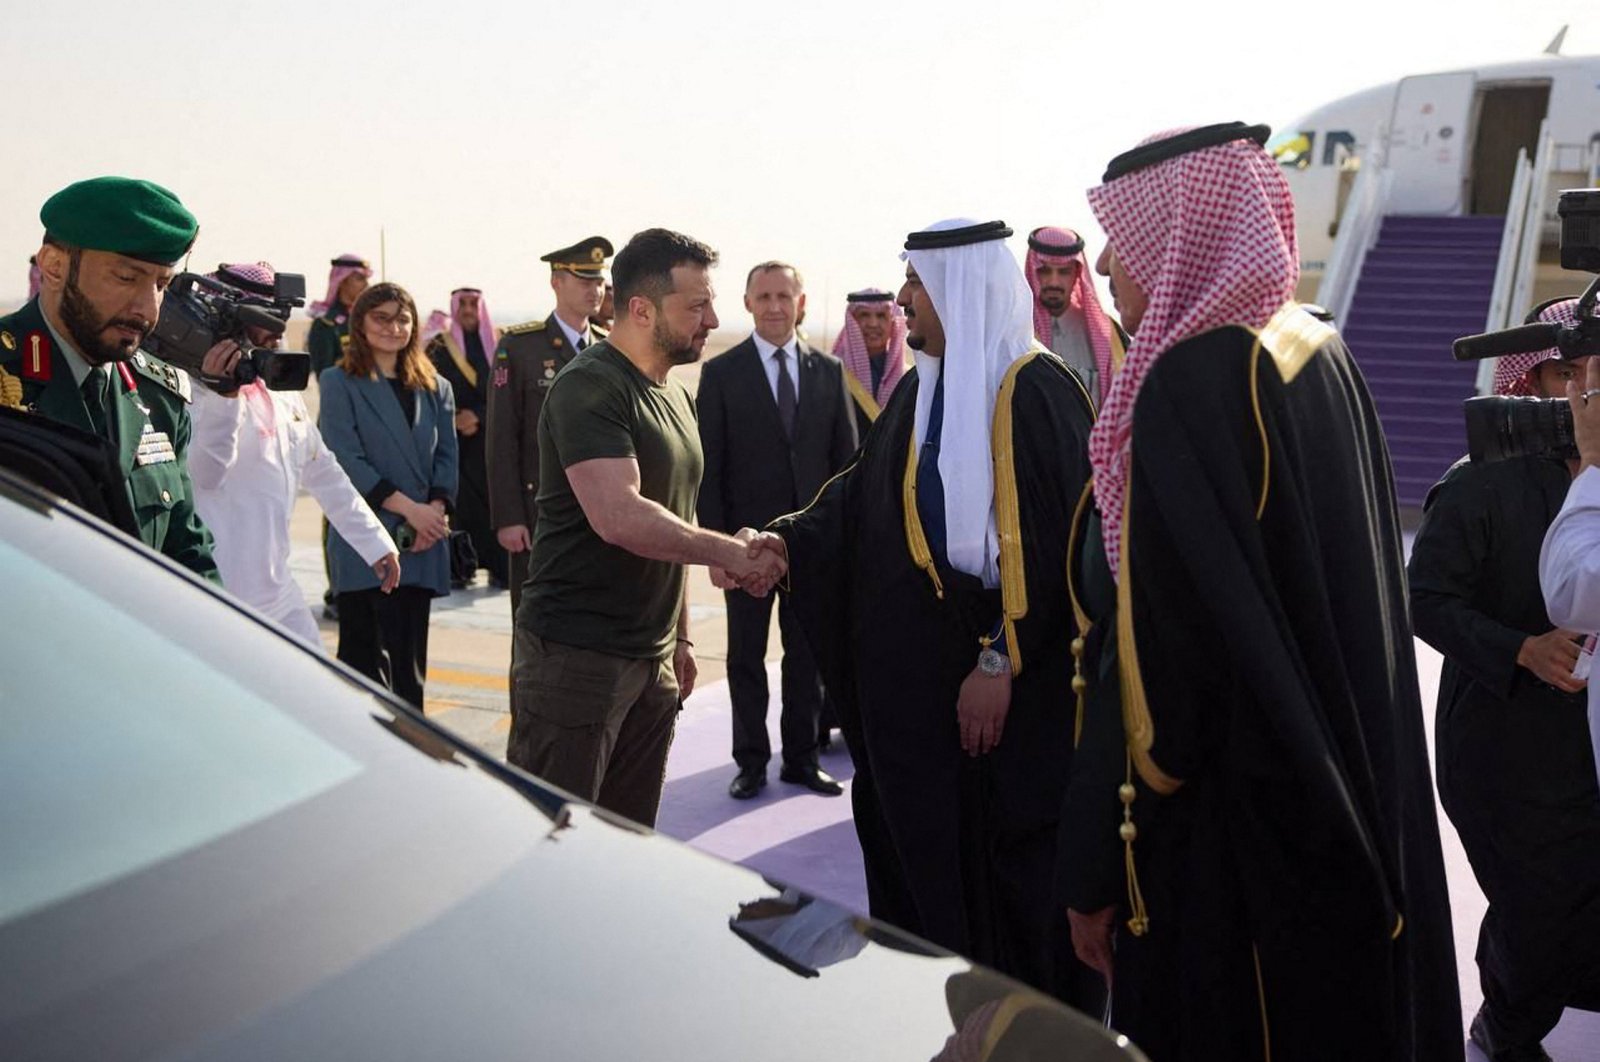 Ukrainian President Volodymyr Zelenskyy arriving in Saudi Arabia to promote his peace plan and discuss potential prisoners-of-war exchanges. (Photo by Handout / Telegram /@V_Zelenskiy_Official / AFP)